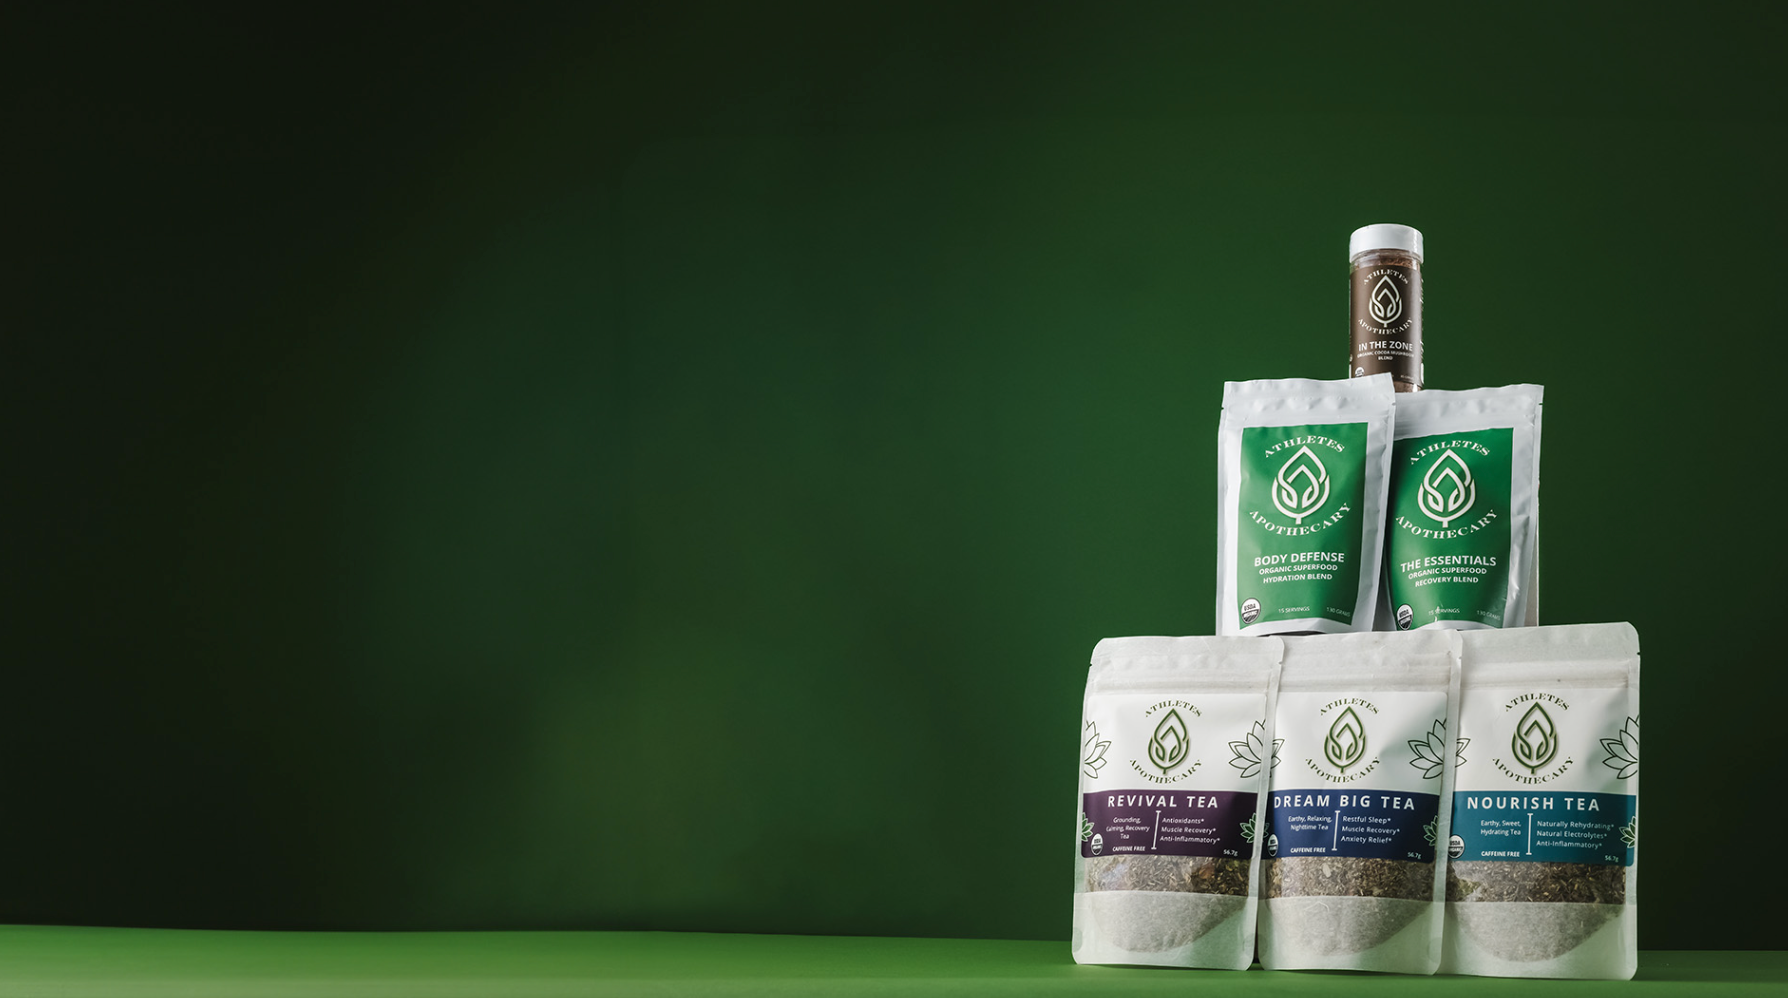 All natural sports drink blends, including teas and superfoods, to the right and an open space to the left with a green background